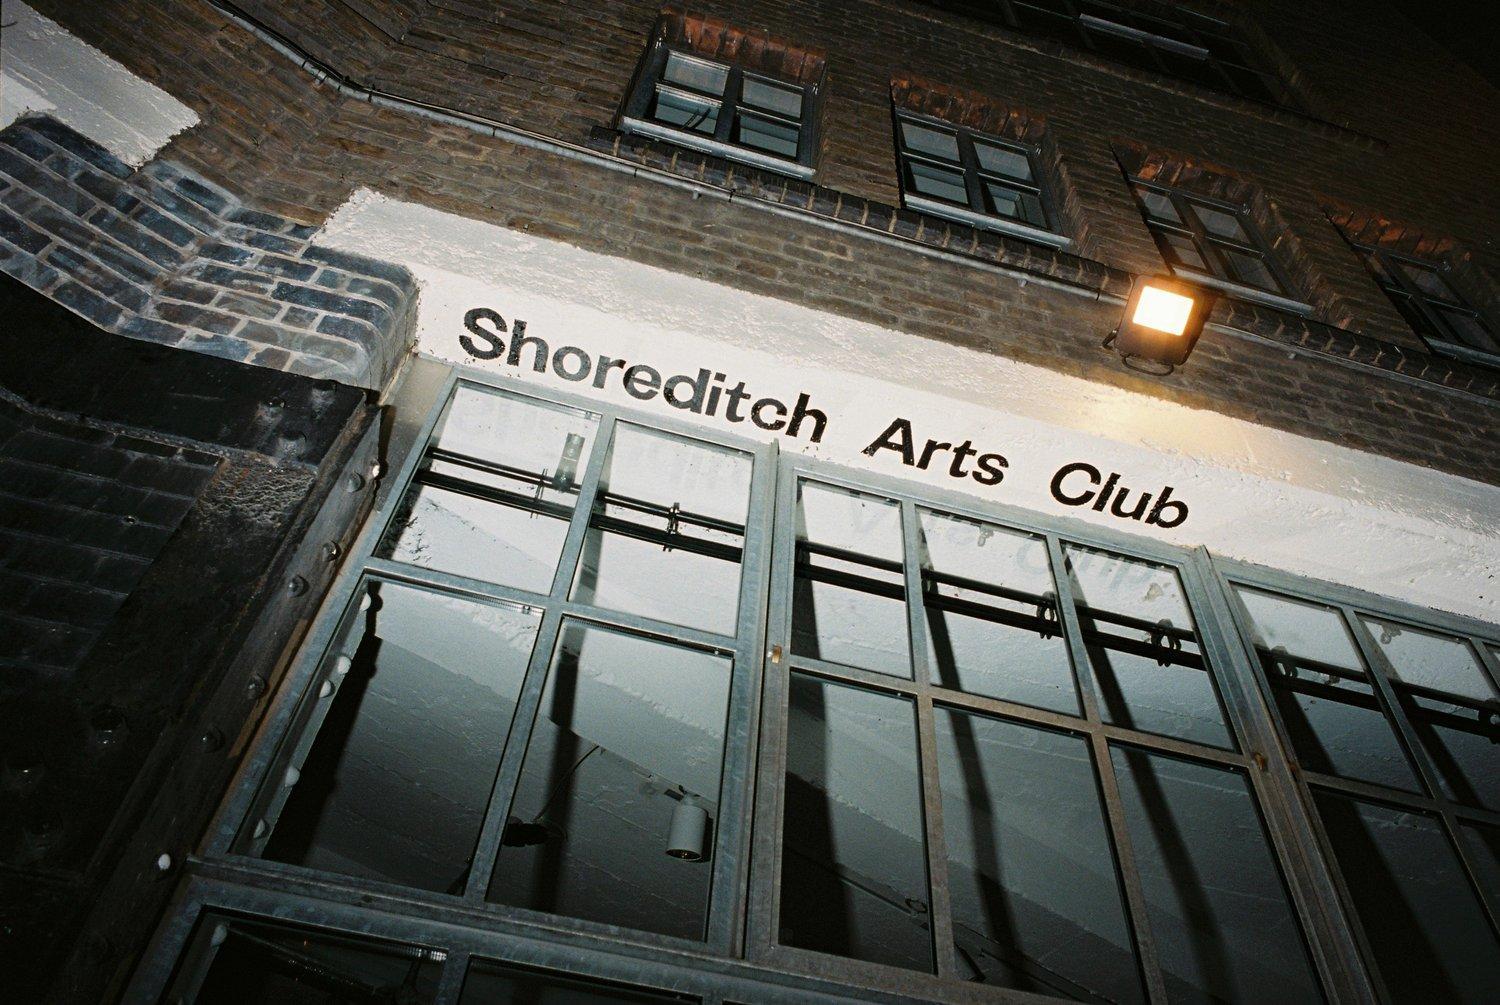 the front entrance of shoredtich arts club